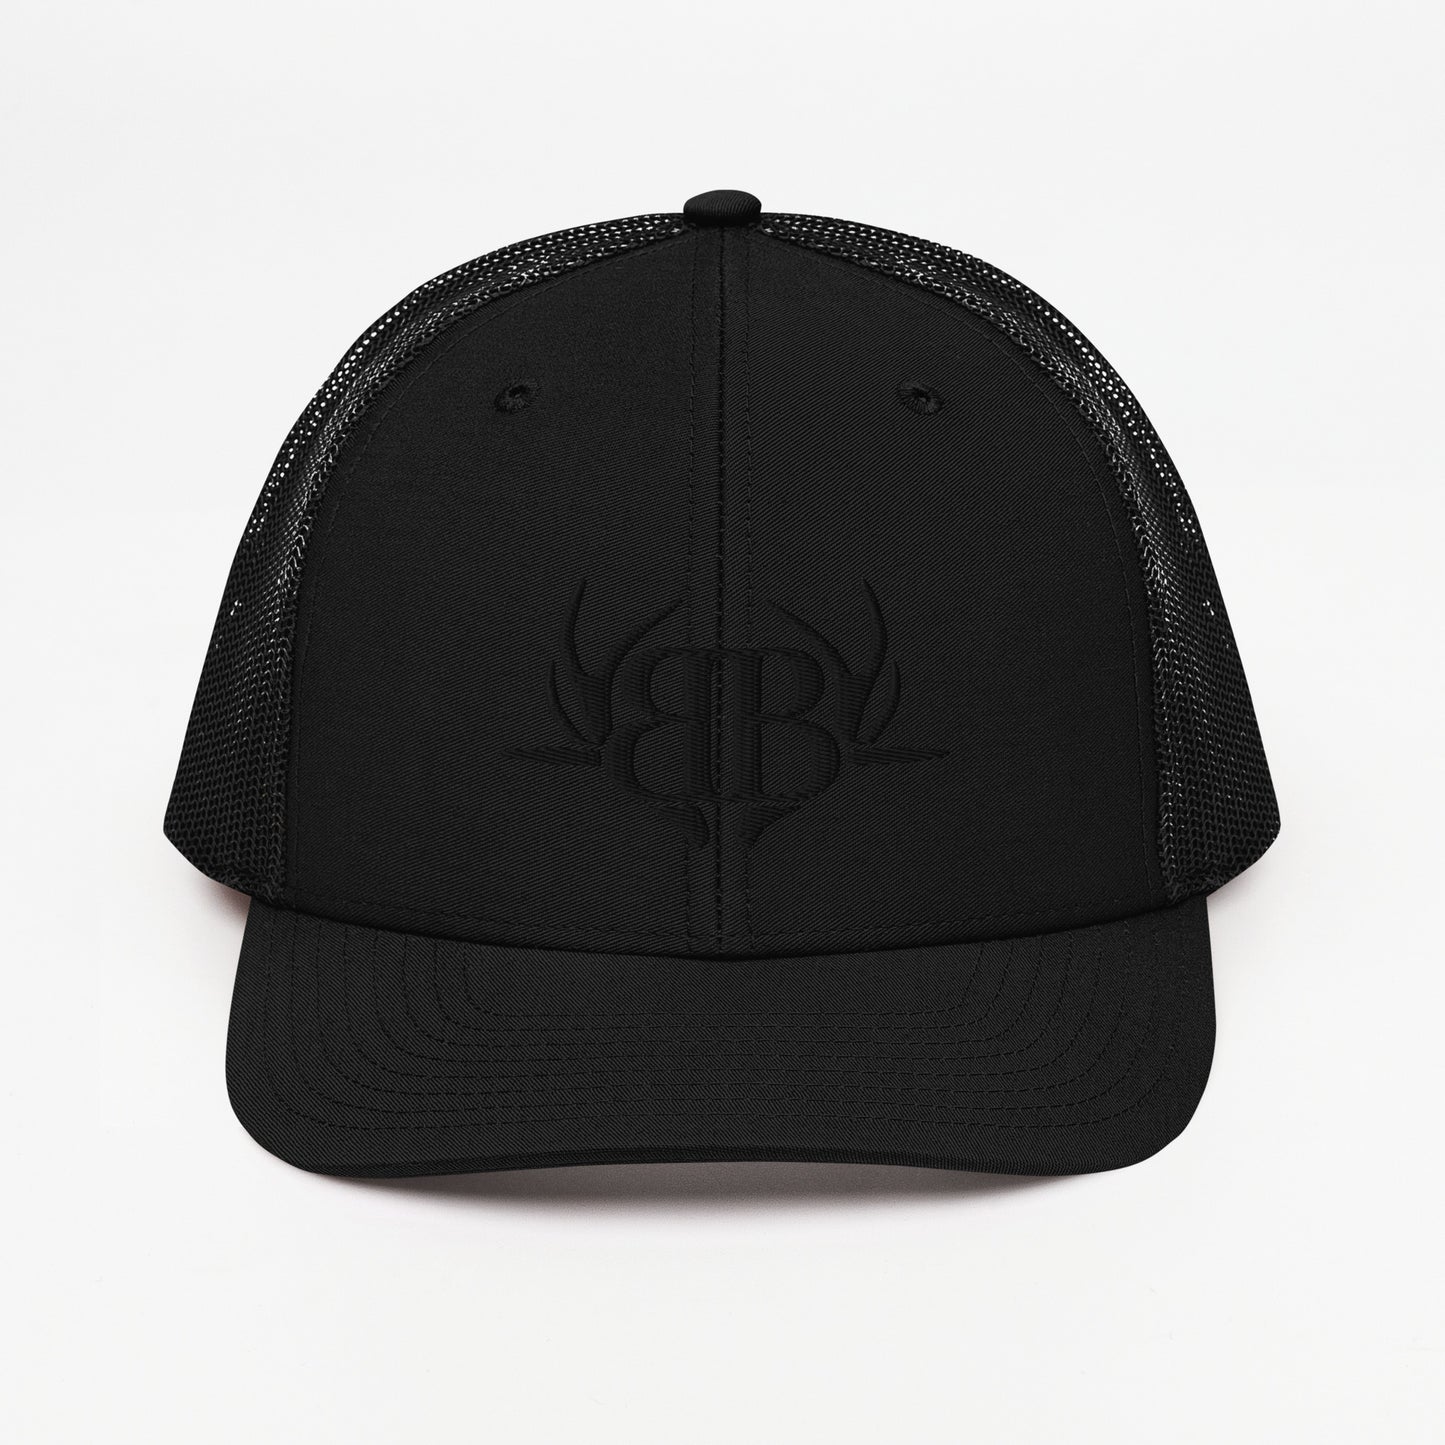 BLACKED OUT Trucker Cap